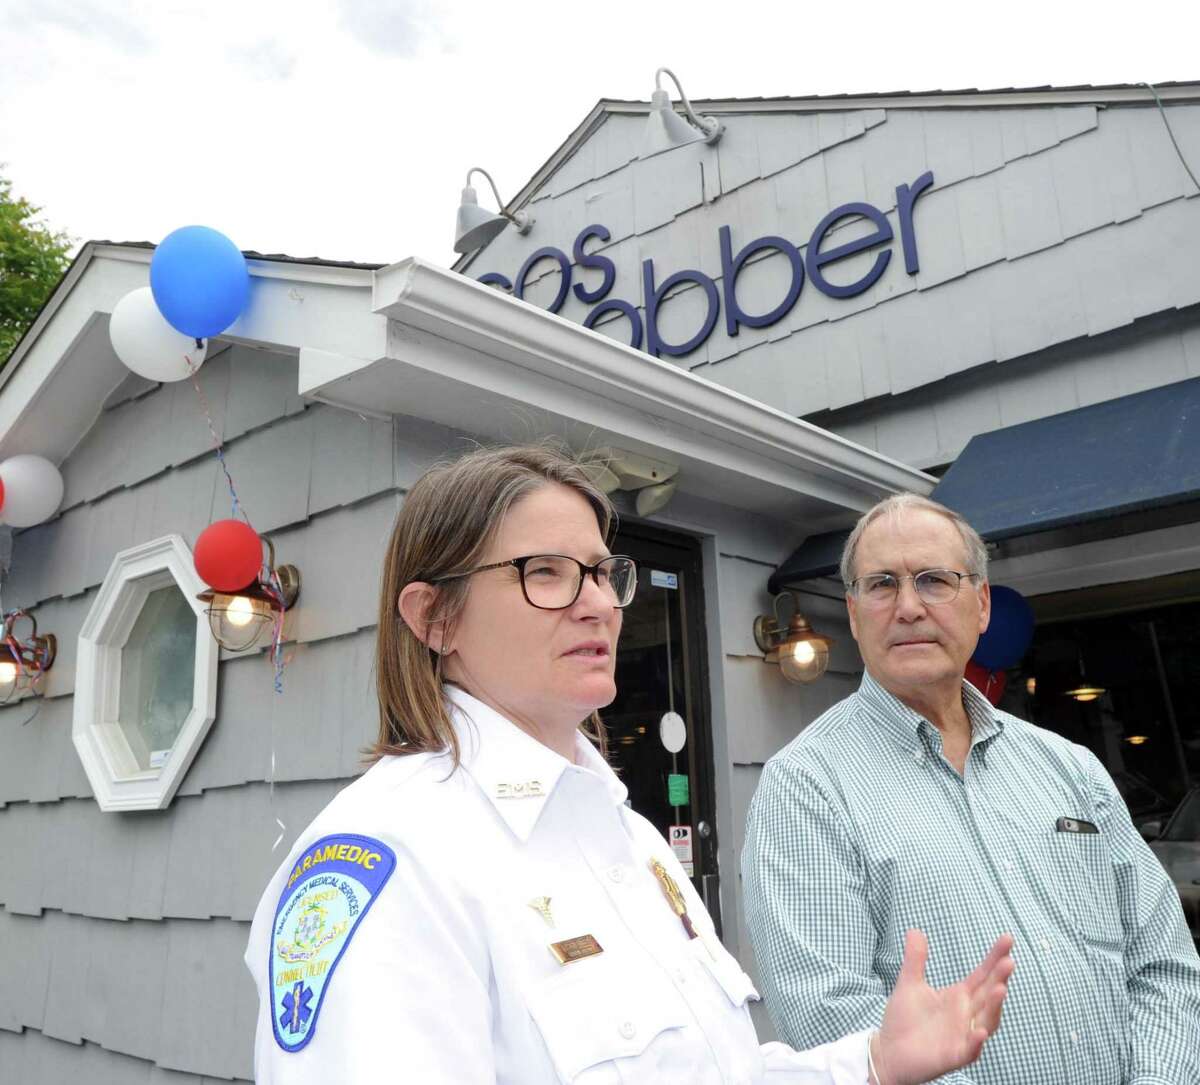 At left, Tracy Schietinger, executive director of GEMS speaks as GEMS Chairman John Raben listens during the GEMS fundraiser at Caren's Cos Cobber Restaurant in the Cos Cob section of Greenwich, Conn., Wednesday, May 24, 2017. Caren Vizzo, the owner of the restaurant said 50% of the proceeds for the day go to GEMS from all the restaurant's sales. The Greenwich Emergency Medical Service, more commonly known as GEMS, is the sole provider of emergency services in the Town of Greenwich and is a non-profit organization.